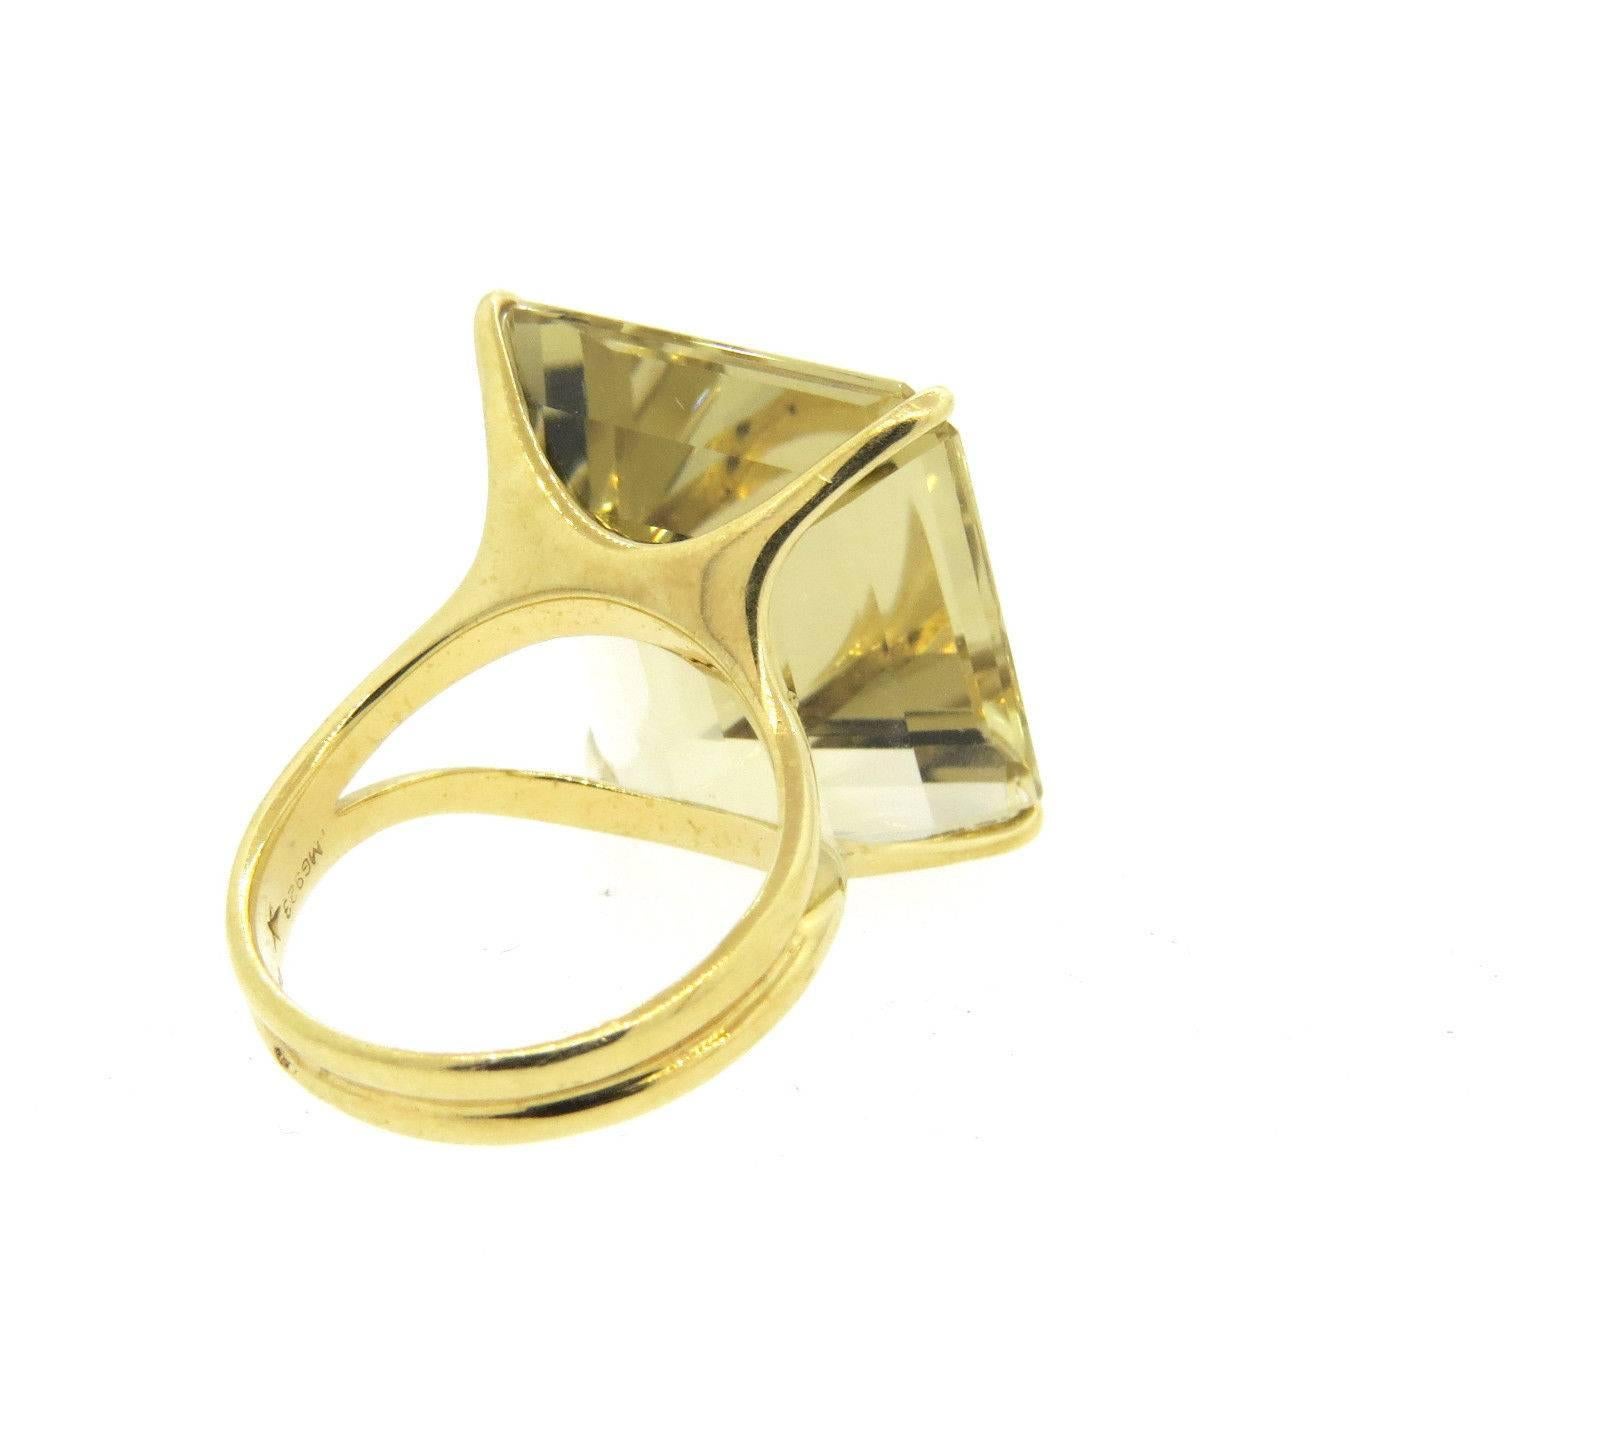 An 18k yellow gold ring set with a quartz measuring 20.2mm x 17.8mm x 9.3mm.  Crafted by H. Stern, the ring is a size 6 1/2.  Marked: Star mark, 750, MG923.  The weight of the ring is 10 grams.